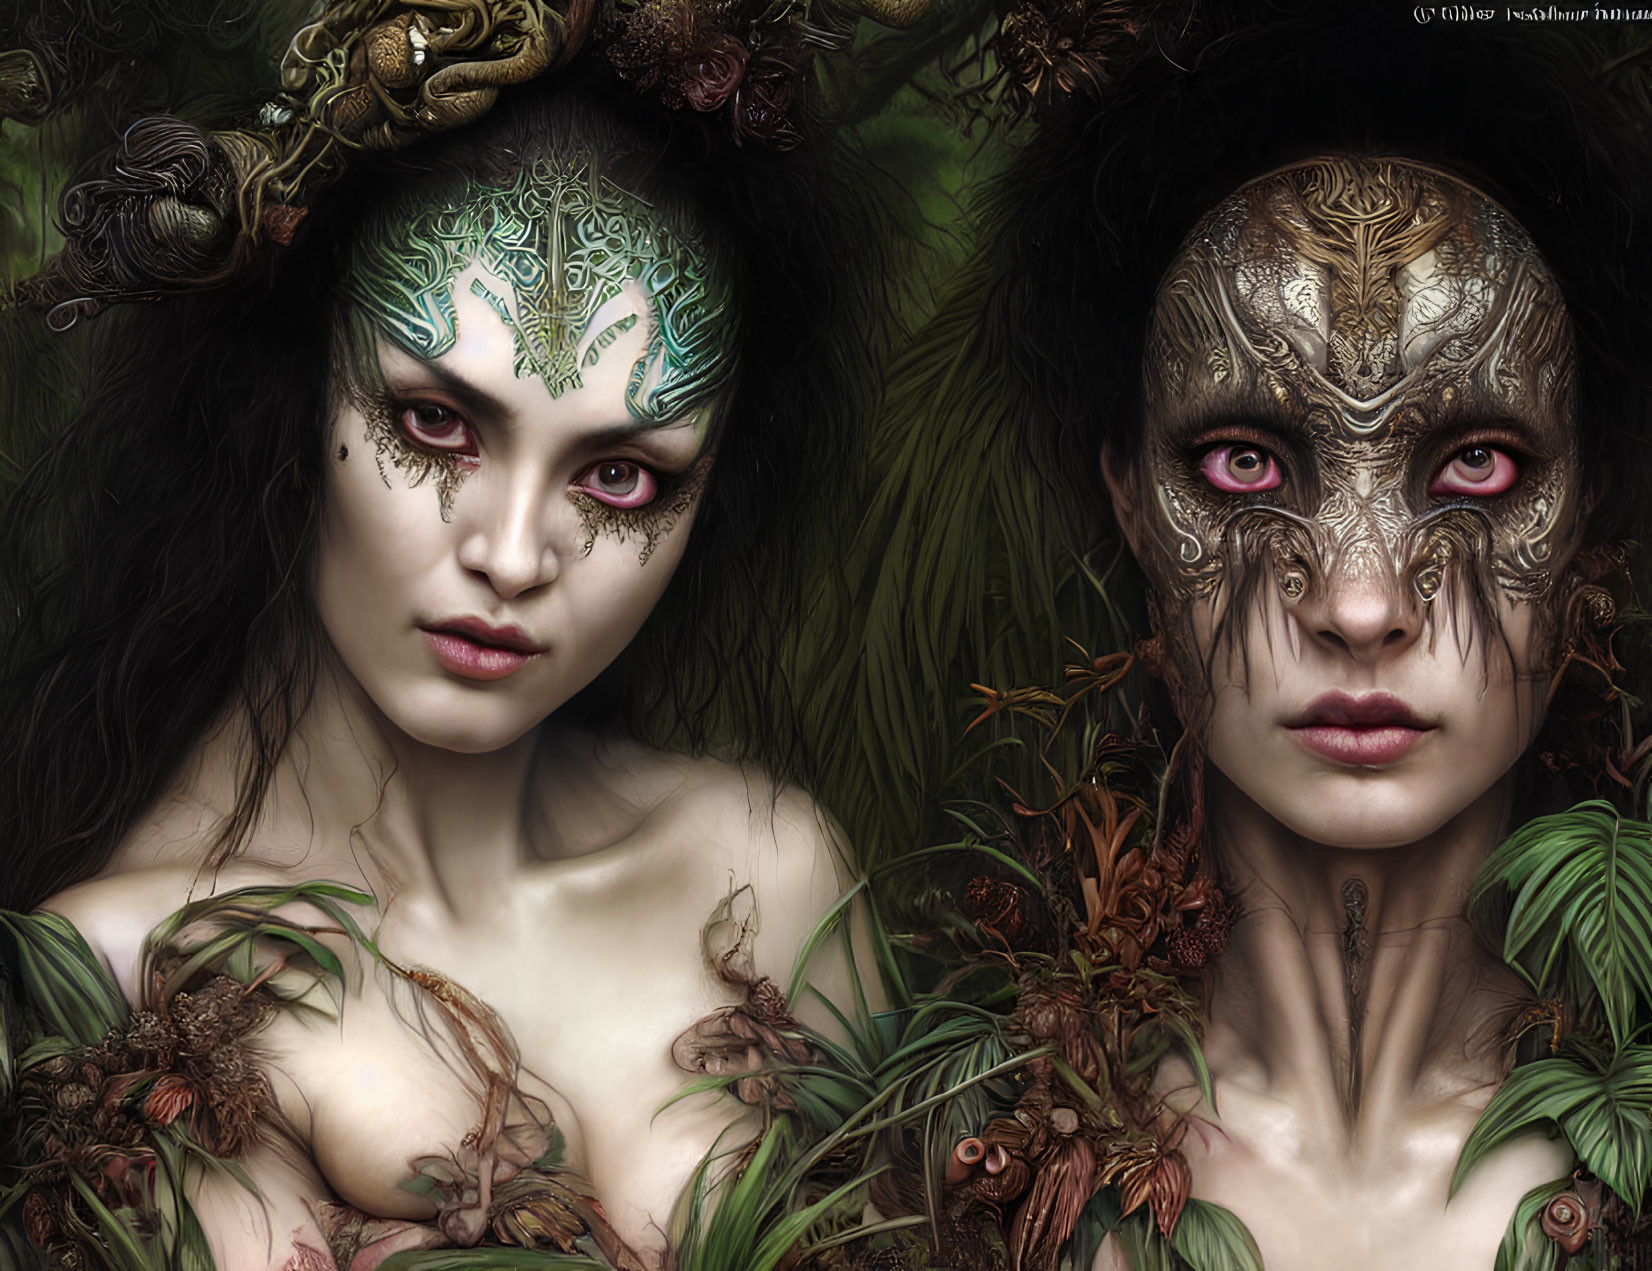 Fantasy figures with intricate face paint and natural decorations.